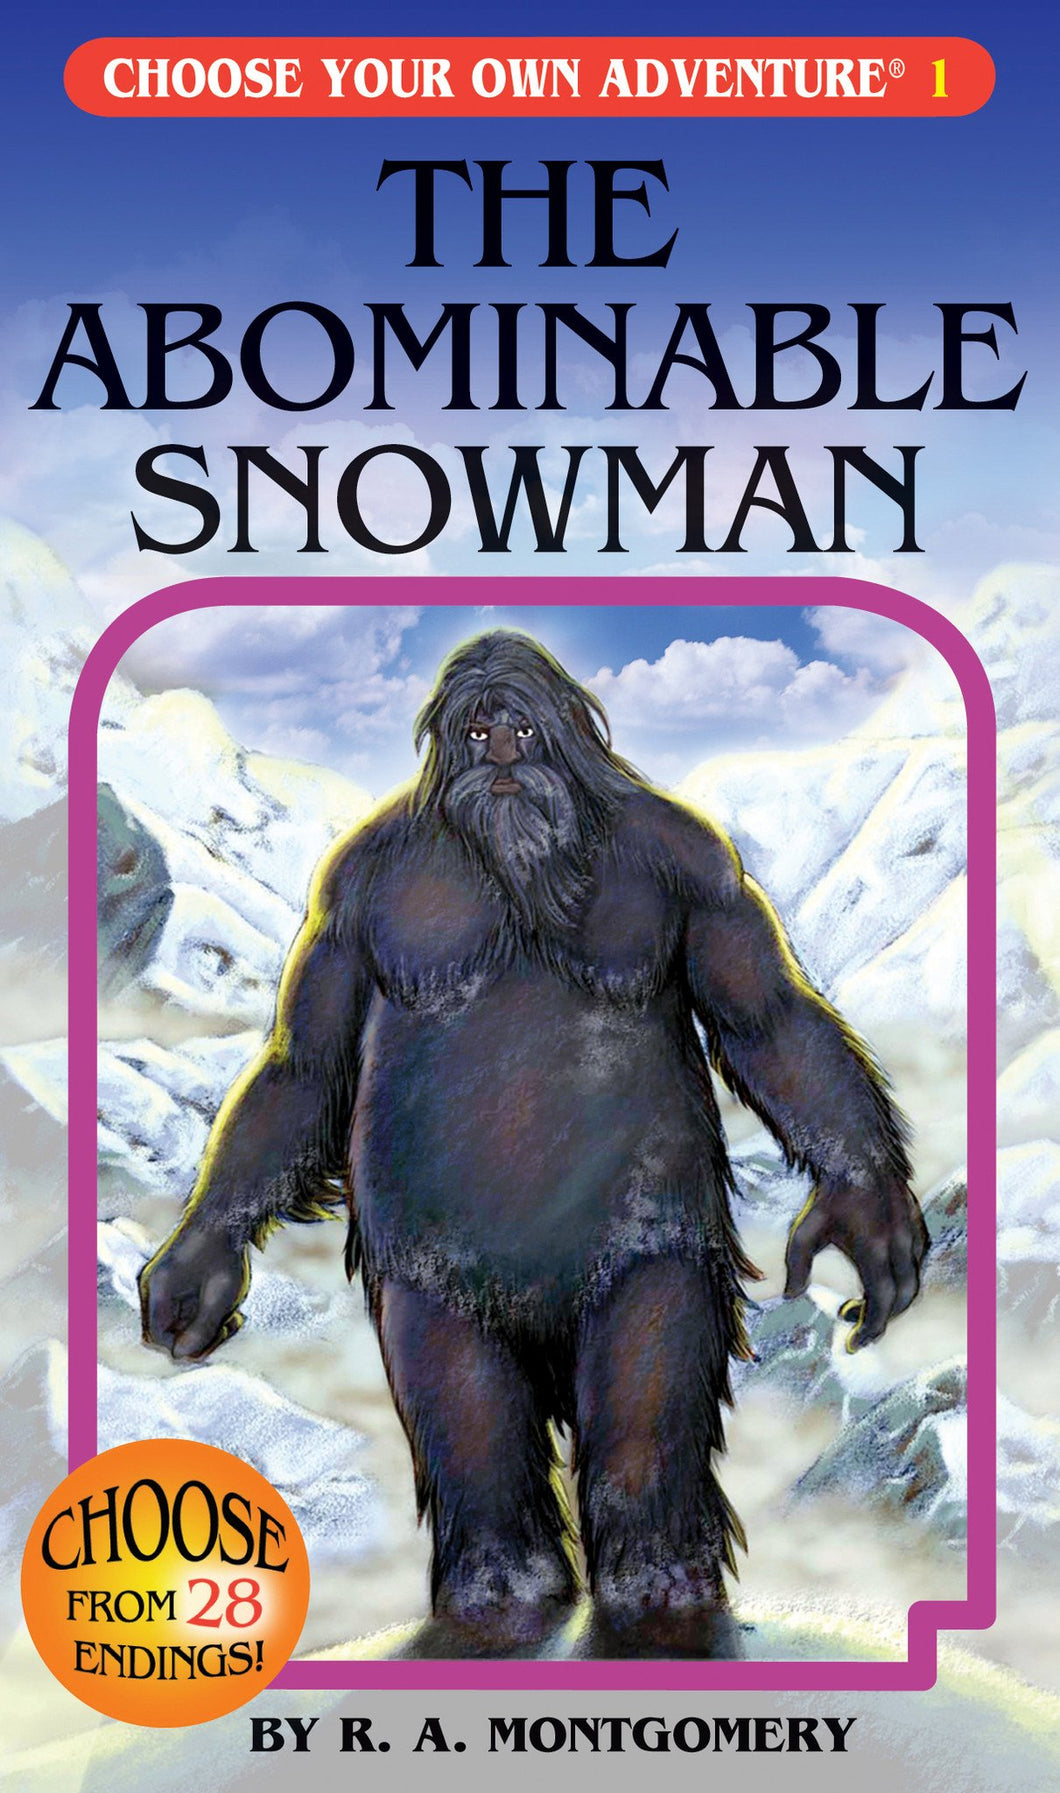 Choose Your Own Adventure Books-The Abominable Snowman #1